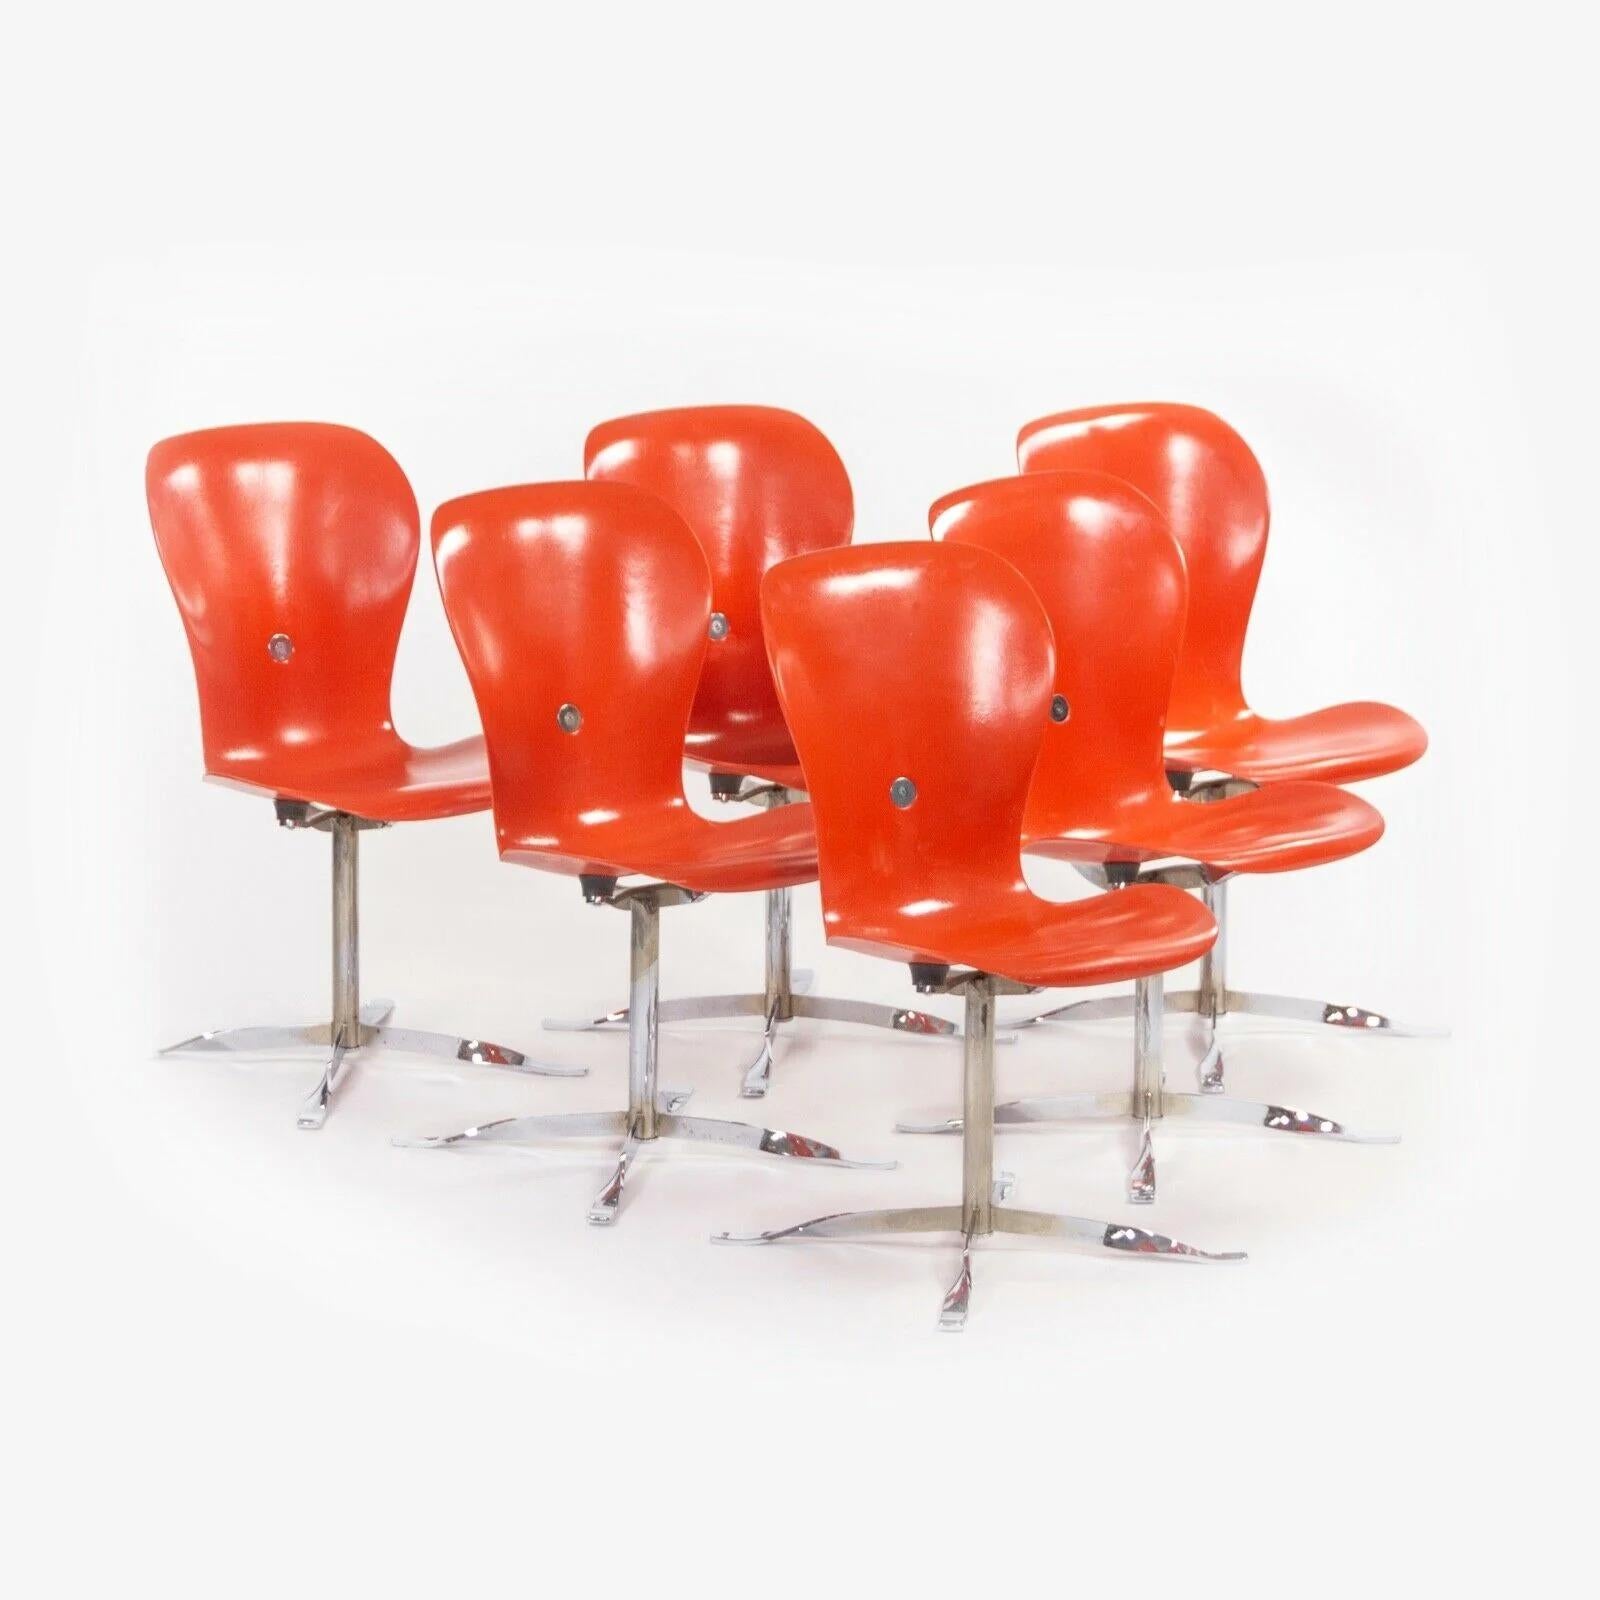 Listed for sale is a gorgeous set of Ion dining chairs, designed by Gideon Kramer and produced by American Desk Corporation. These original and iconic pieces were first designed for the revolving restaurant at the top of the Seattle Space Needle.